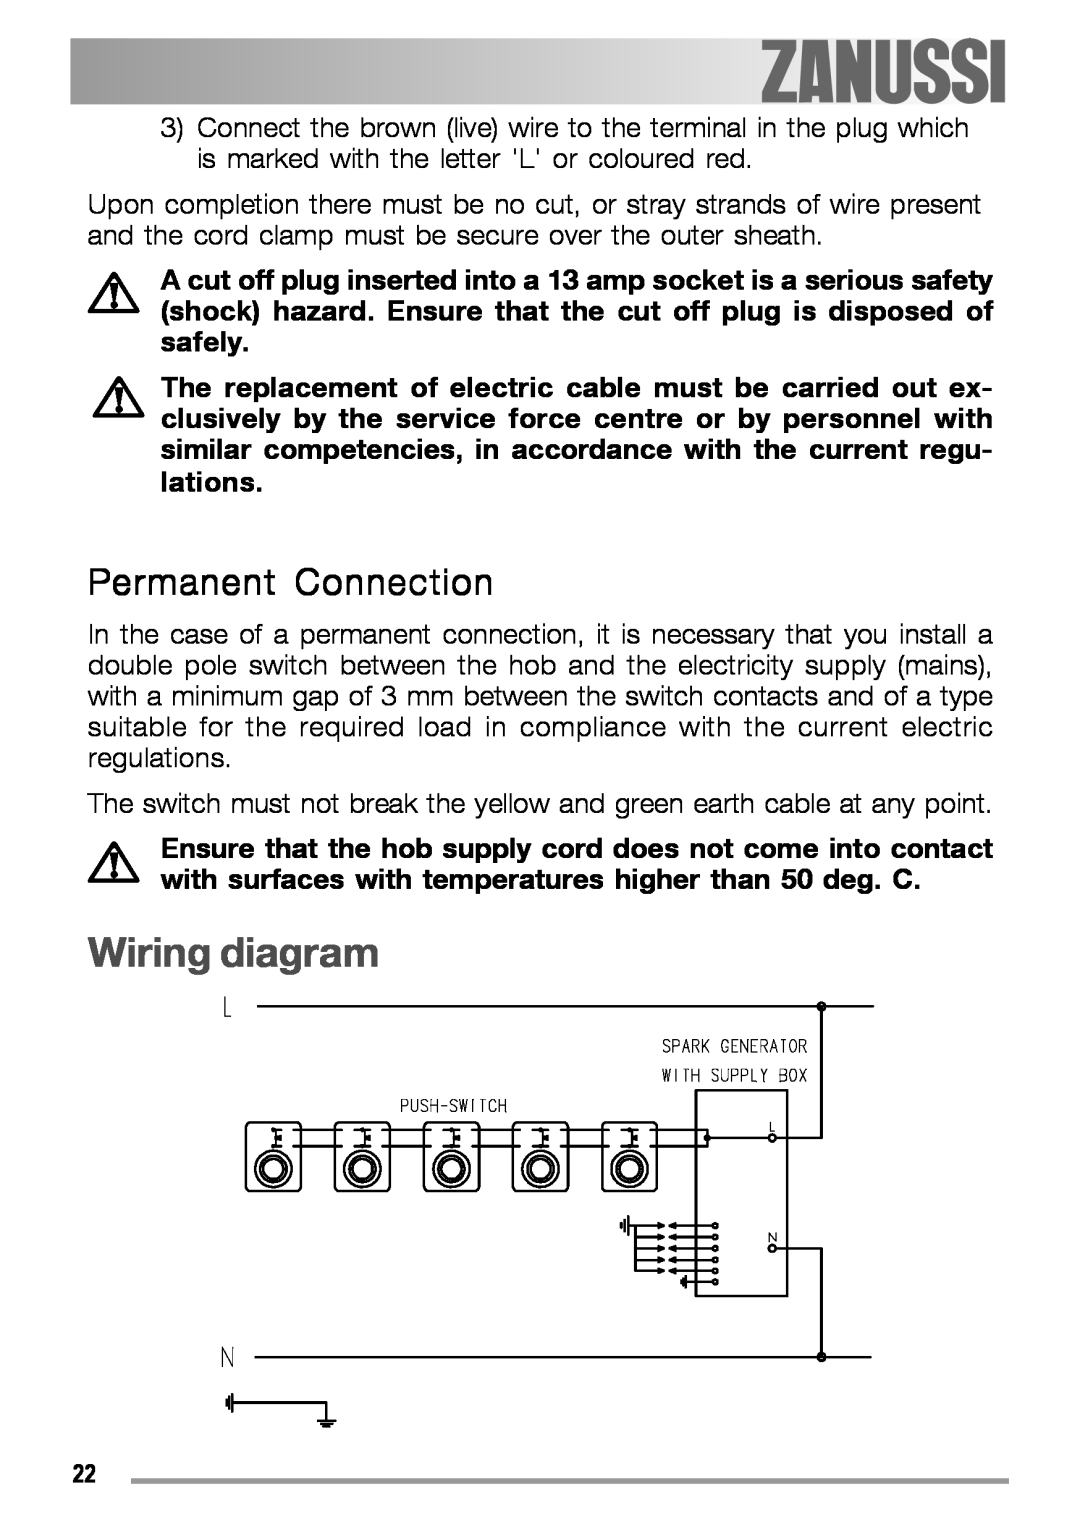 Zanussi ZGF 780 IT manual Wiring diagram, Permanent Connection 